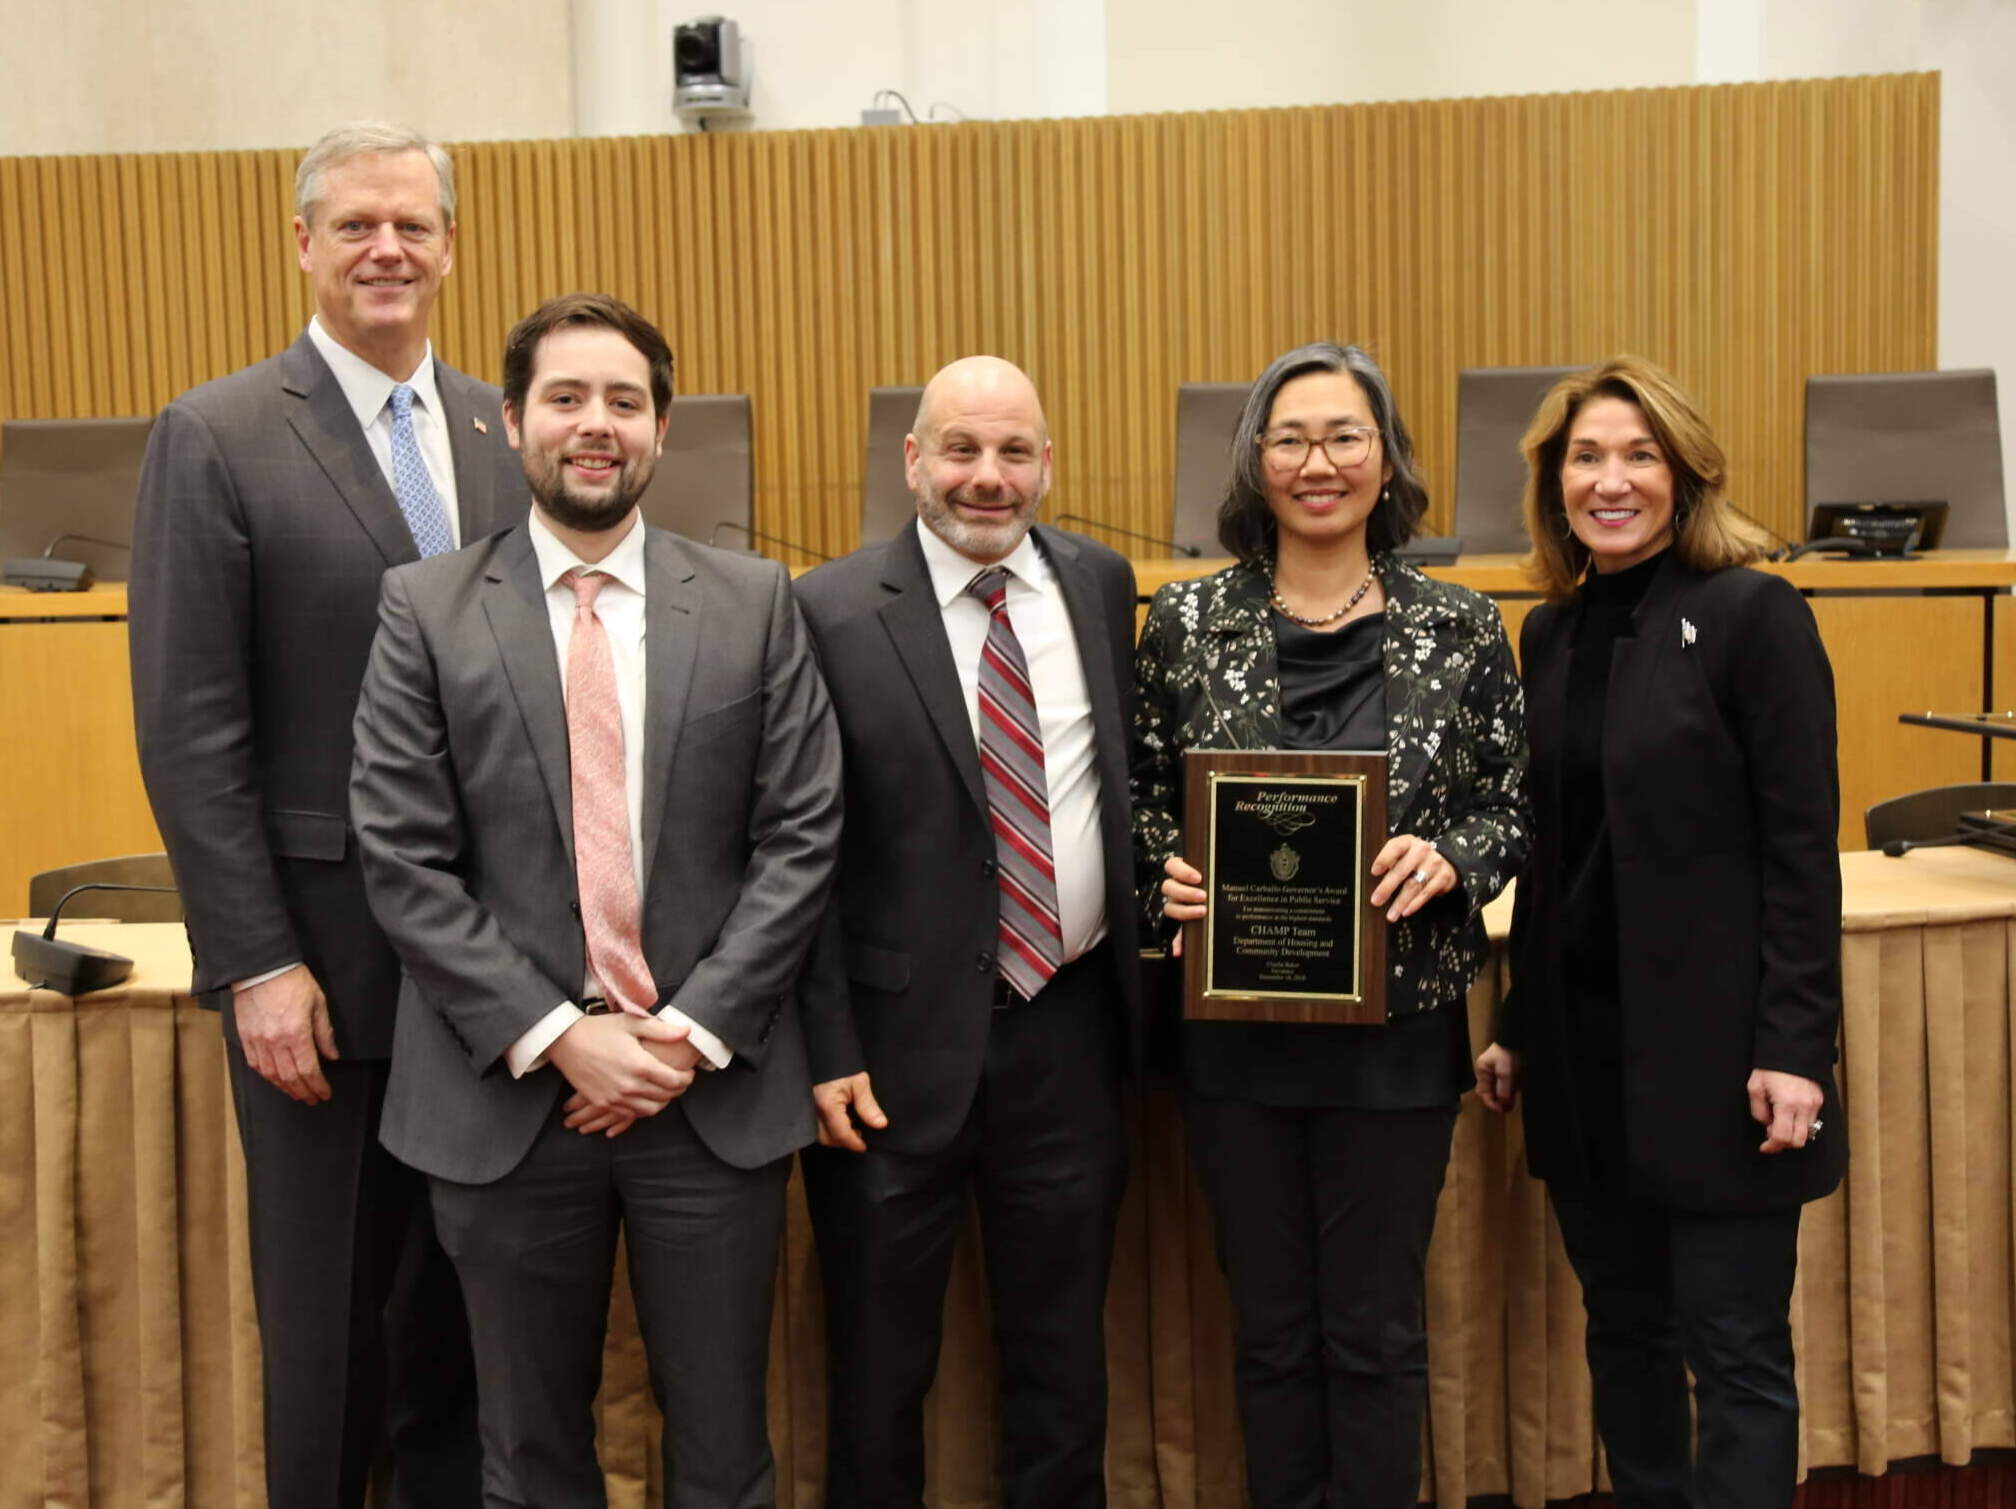 Gov. Charlie Baker and Lt. Gov. Karyn Polito honor state housing officials with the Manuel Carballo Award for Excellence in 2019. (Photo obtained by public records request)